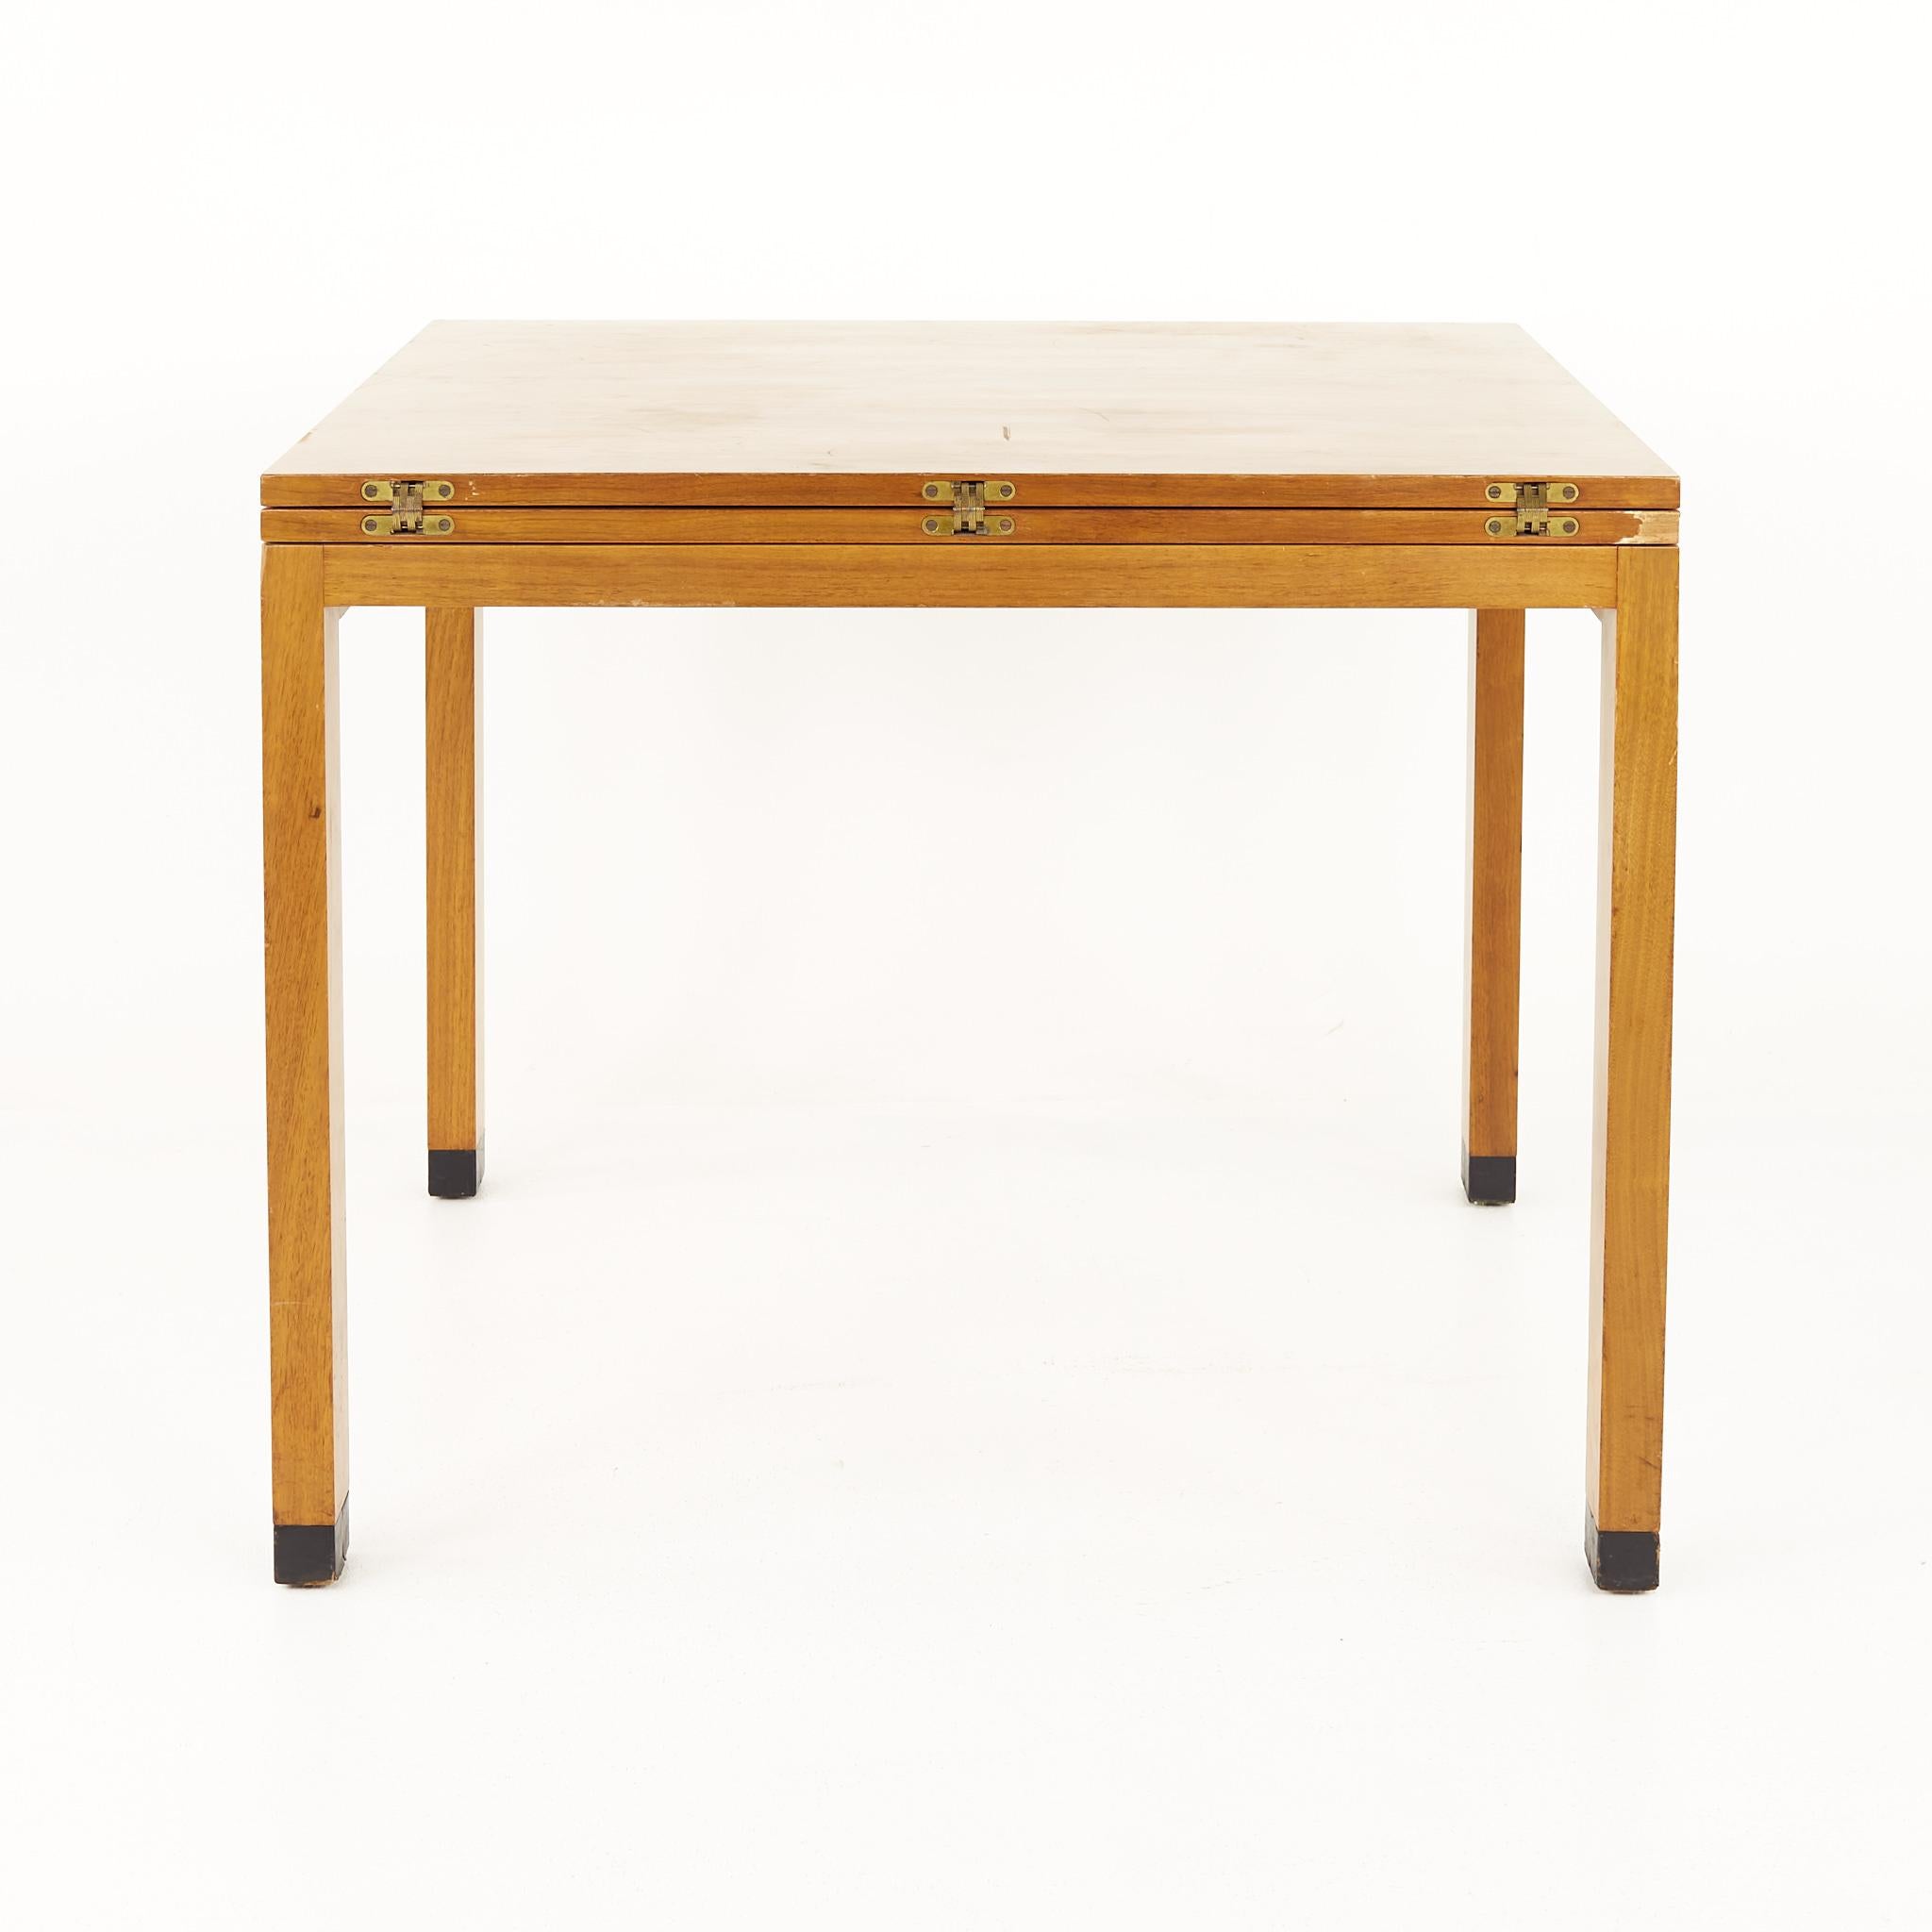 Dunbar mid century flip top dining game table

This table measures: 36 wide x 36 deep x 29.25 inches high, with a chair clearance of 25.75 inches, the maximum table width when unfolded is 64 inches

All pieces of furniture can be had in what we